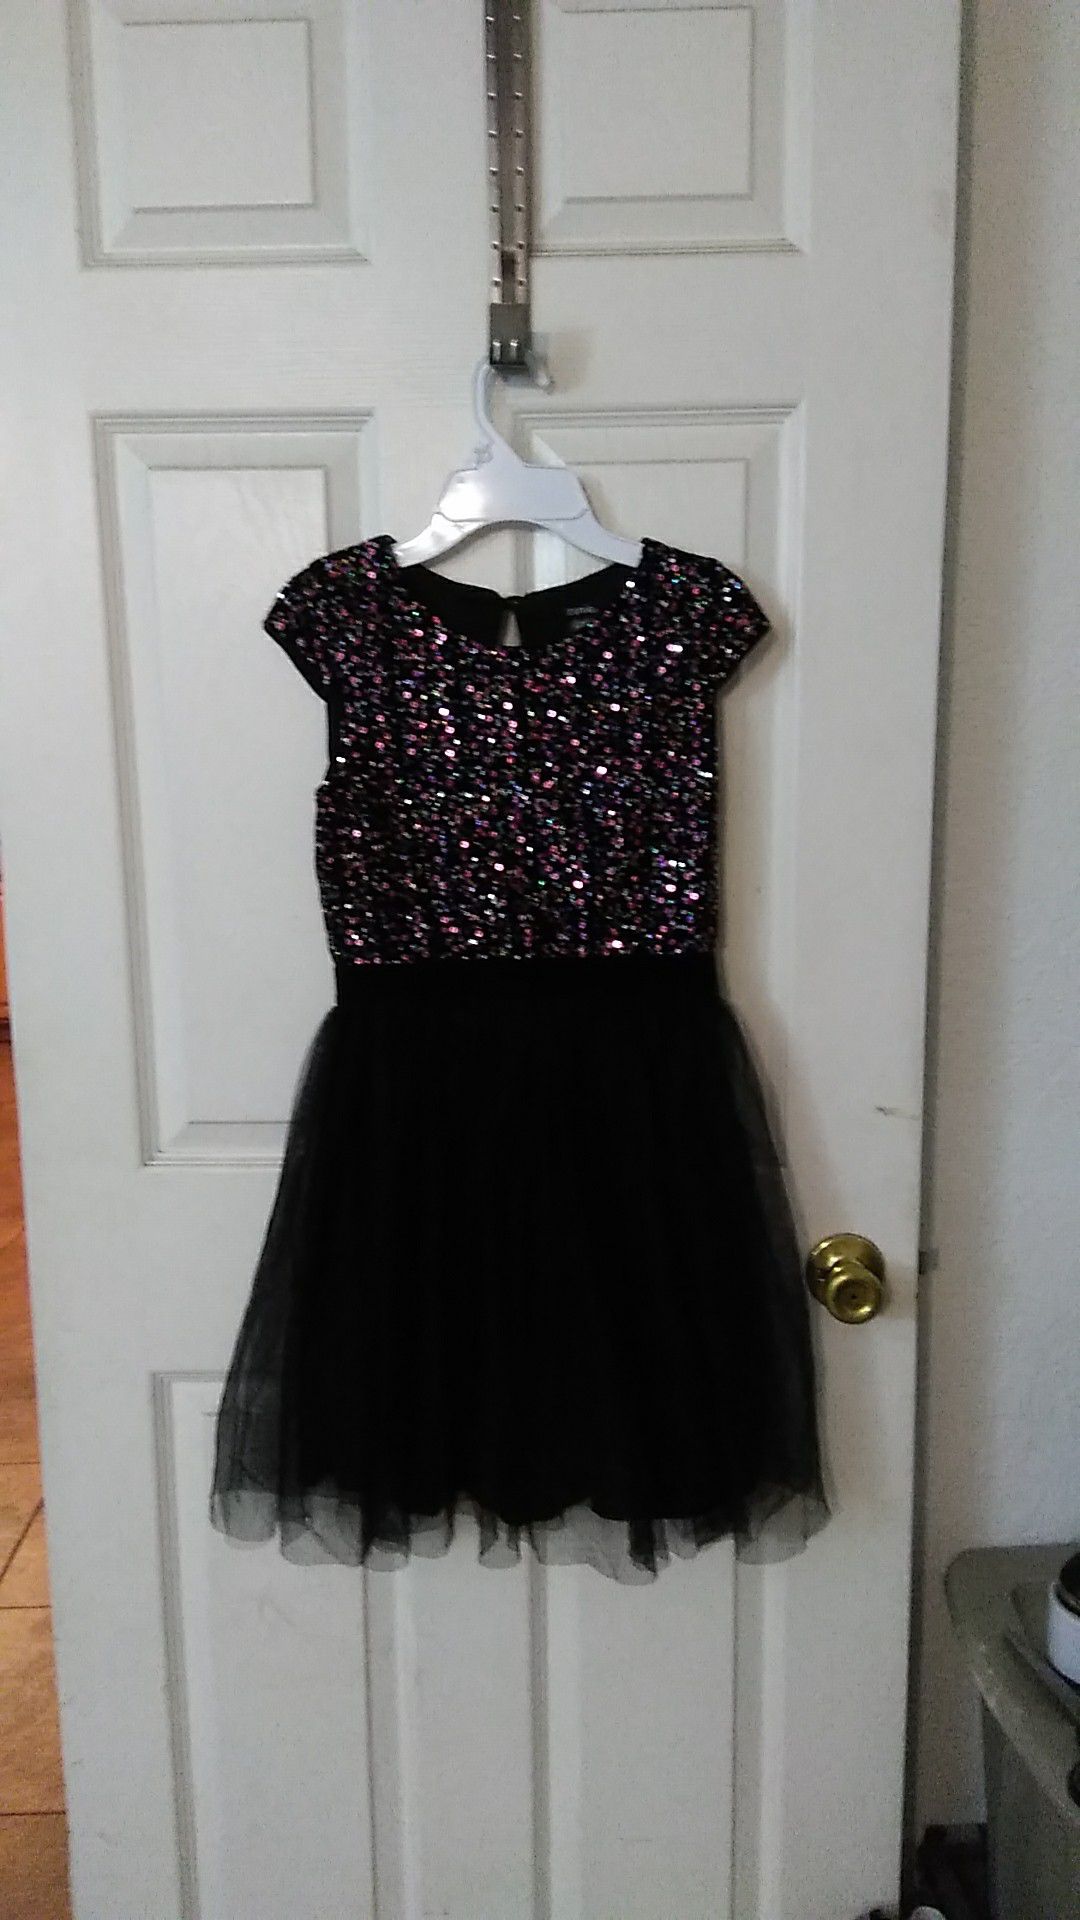 Nice Holiday dress with Sequence on top.full button dress with under slip. 8.00 O.B.O. size 12